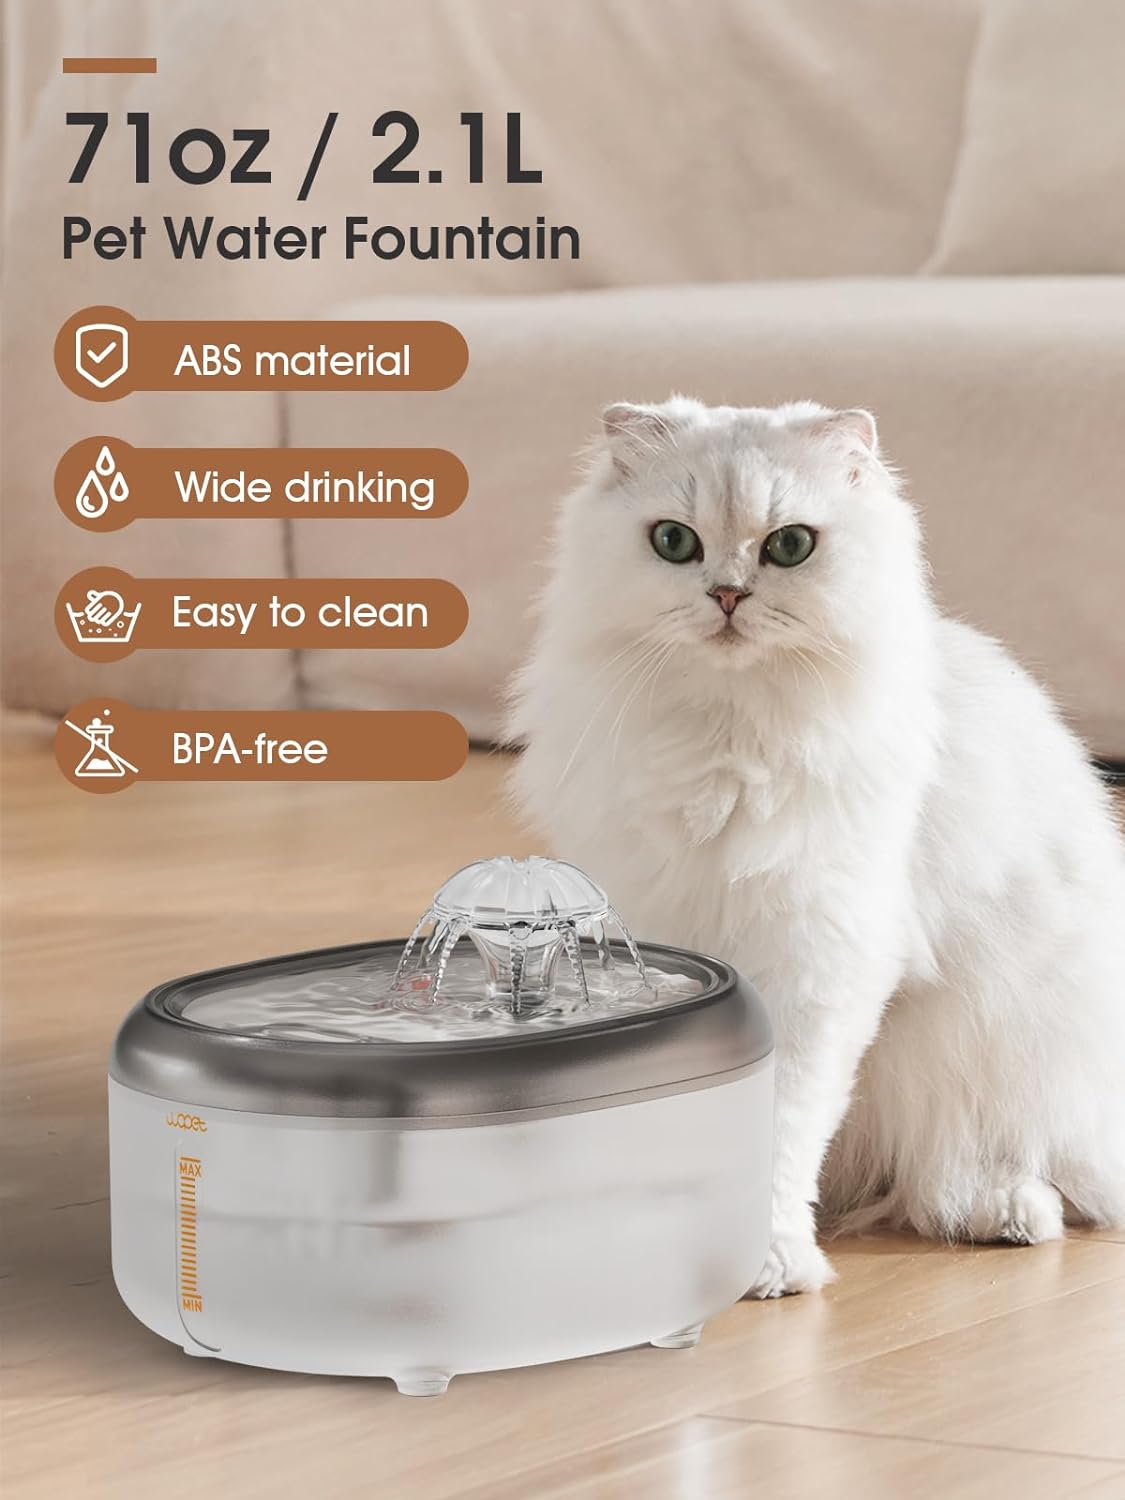 WOPET Cat Water Fountain, 2.1L Cat Water Dispenser with BPA-Free, Translucent Water Tank, Ultra Quiet Water Fountain for Cats Inside, Pet Water Fountain for Cats, Small Dogs